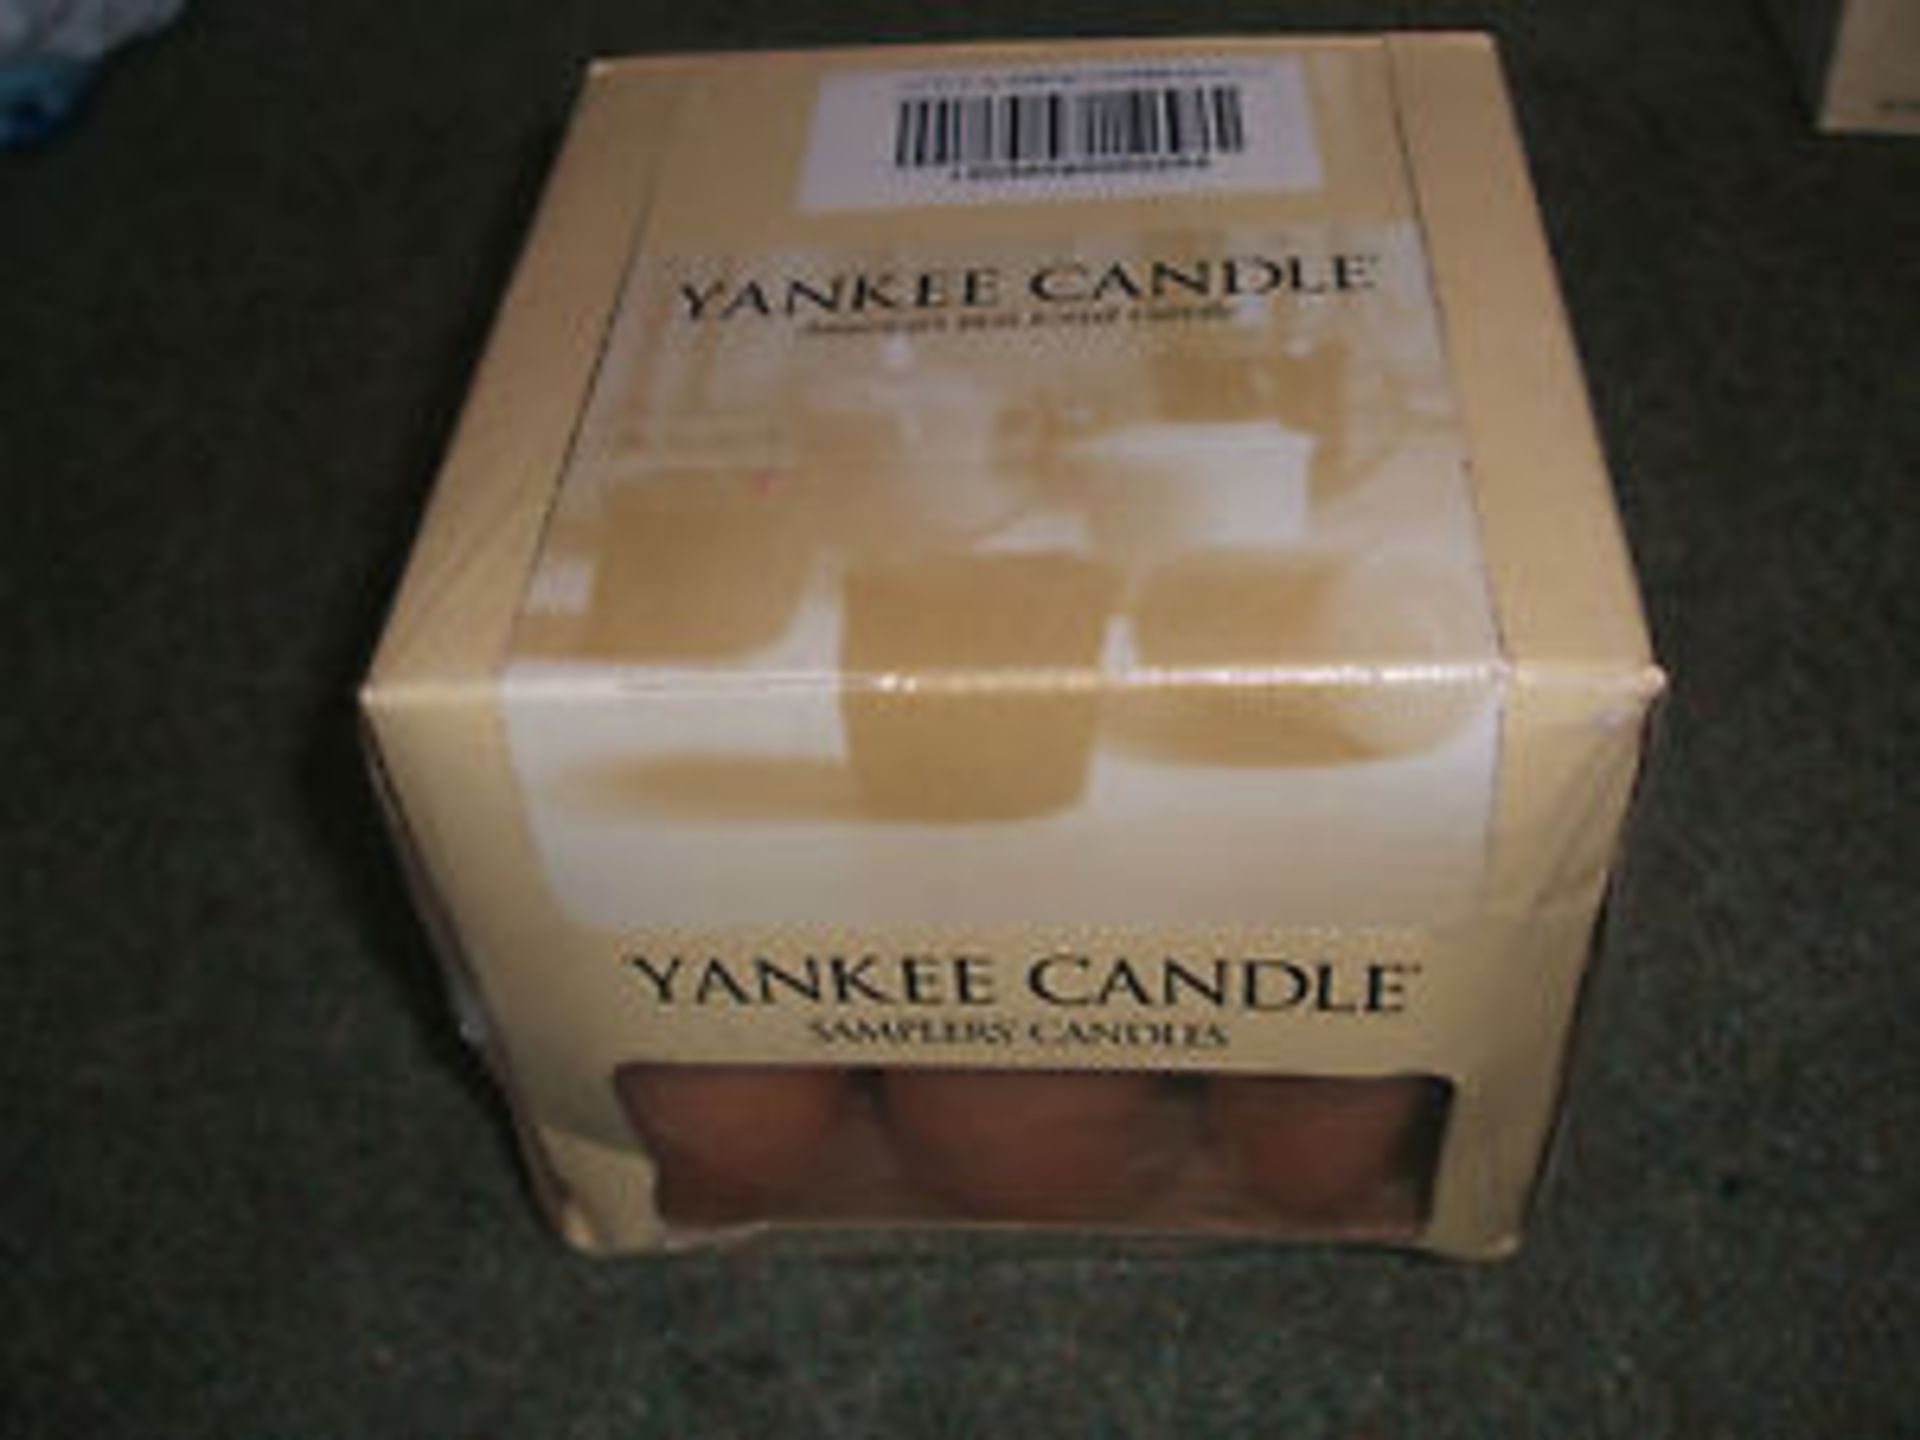 V Brand New 18 x Yankee Candle Christmas Baking 49g eBay Price £19.99 X 2 YOUR BID PRICE TO BE - Image 2 of 2